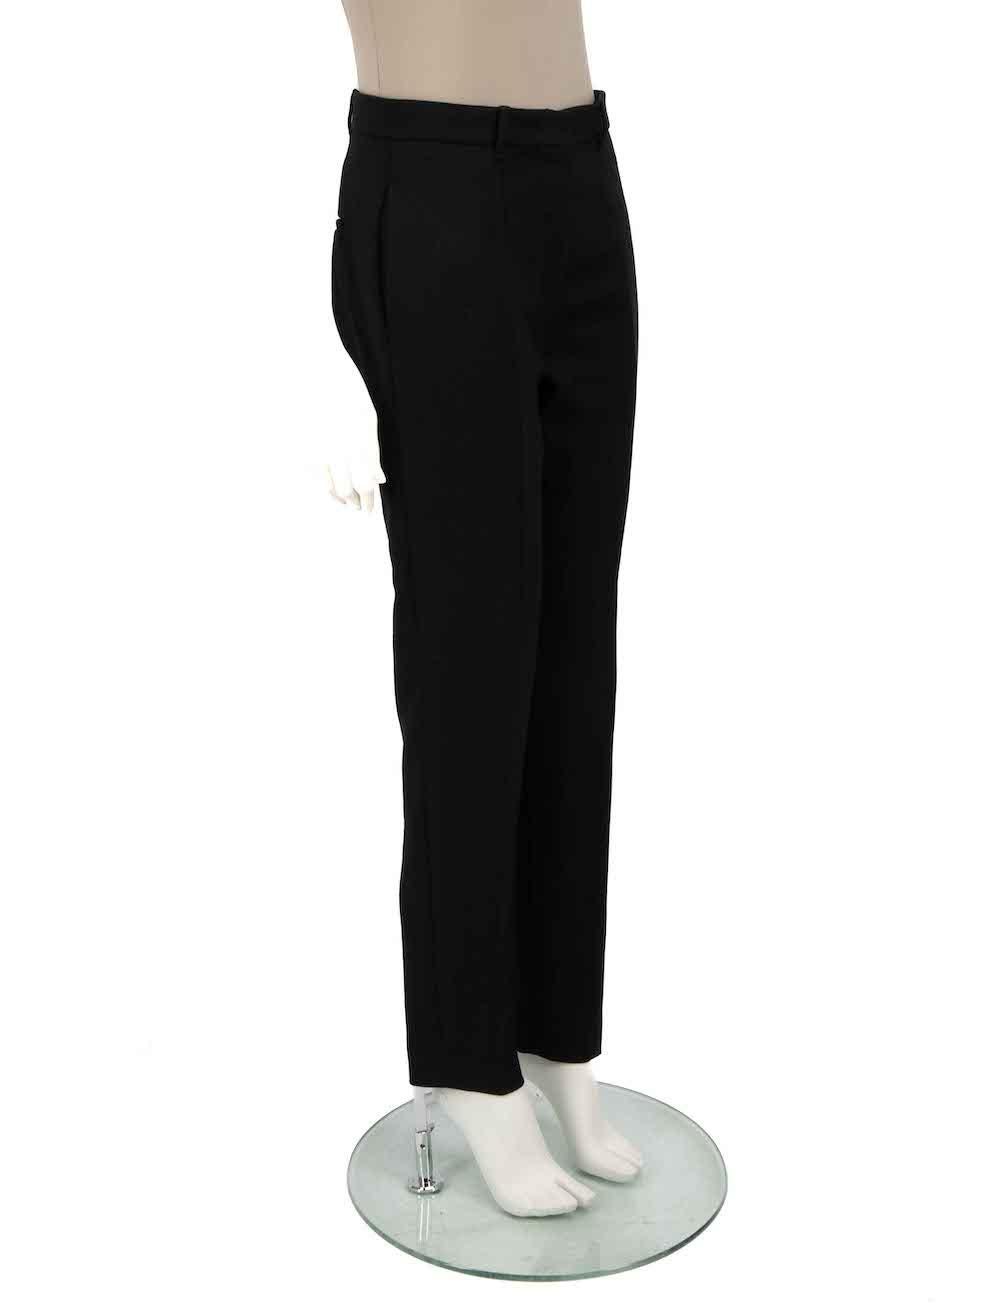 CONDITION is Very good. Hardly any visible wear to trousers is evident on this used Jil Sander designer resale item.
 
 
 
 Details
 
 
 Black
 
 Wool
 
 Trousers
 
 Slim fit
 
 High rise
 
 2x Side pockets
 
 Fly zip, hook and button fastening
 
 
